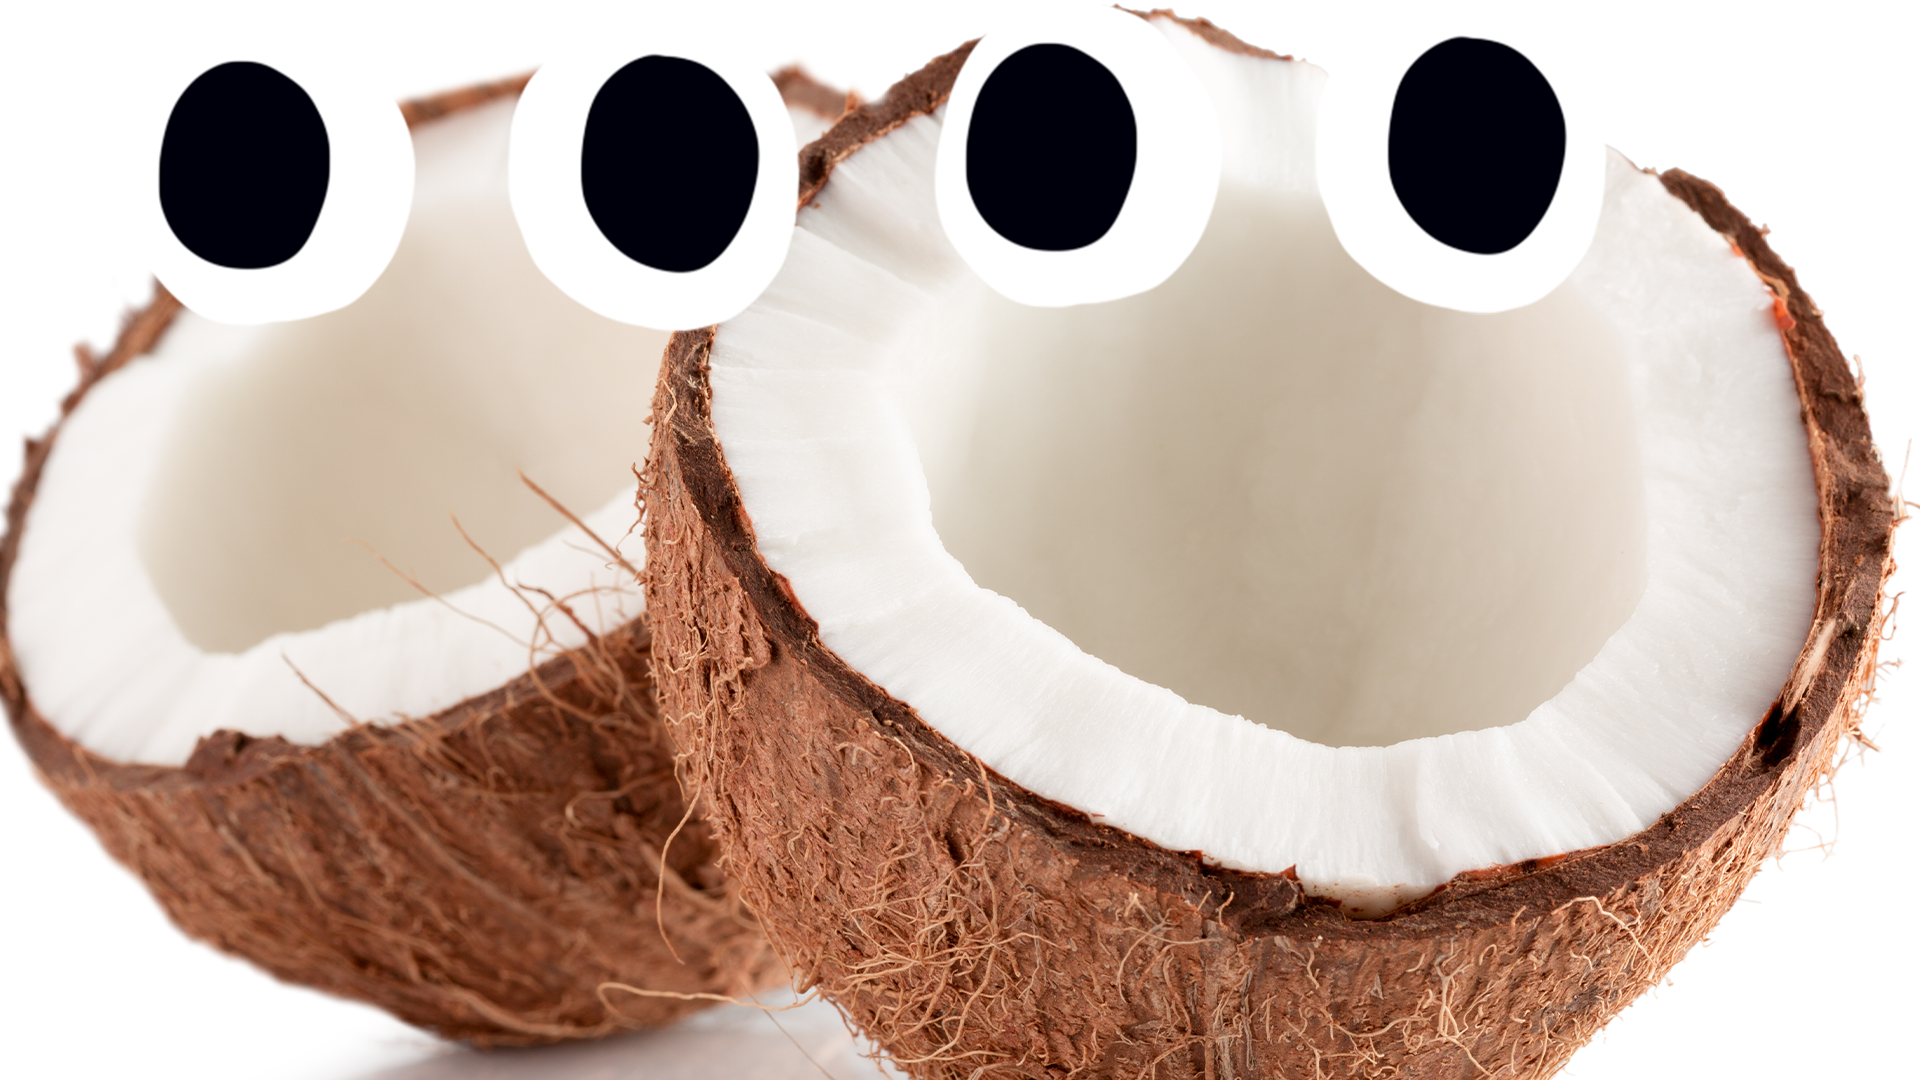 Coconuts with eyes